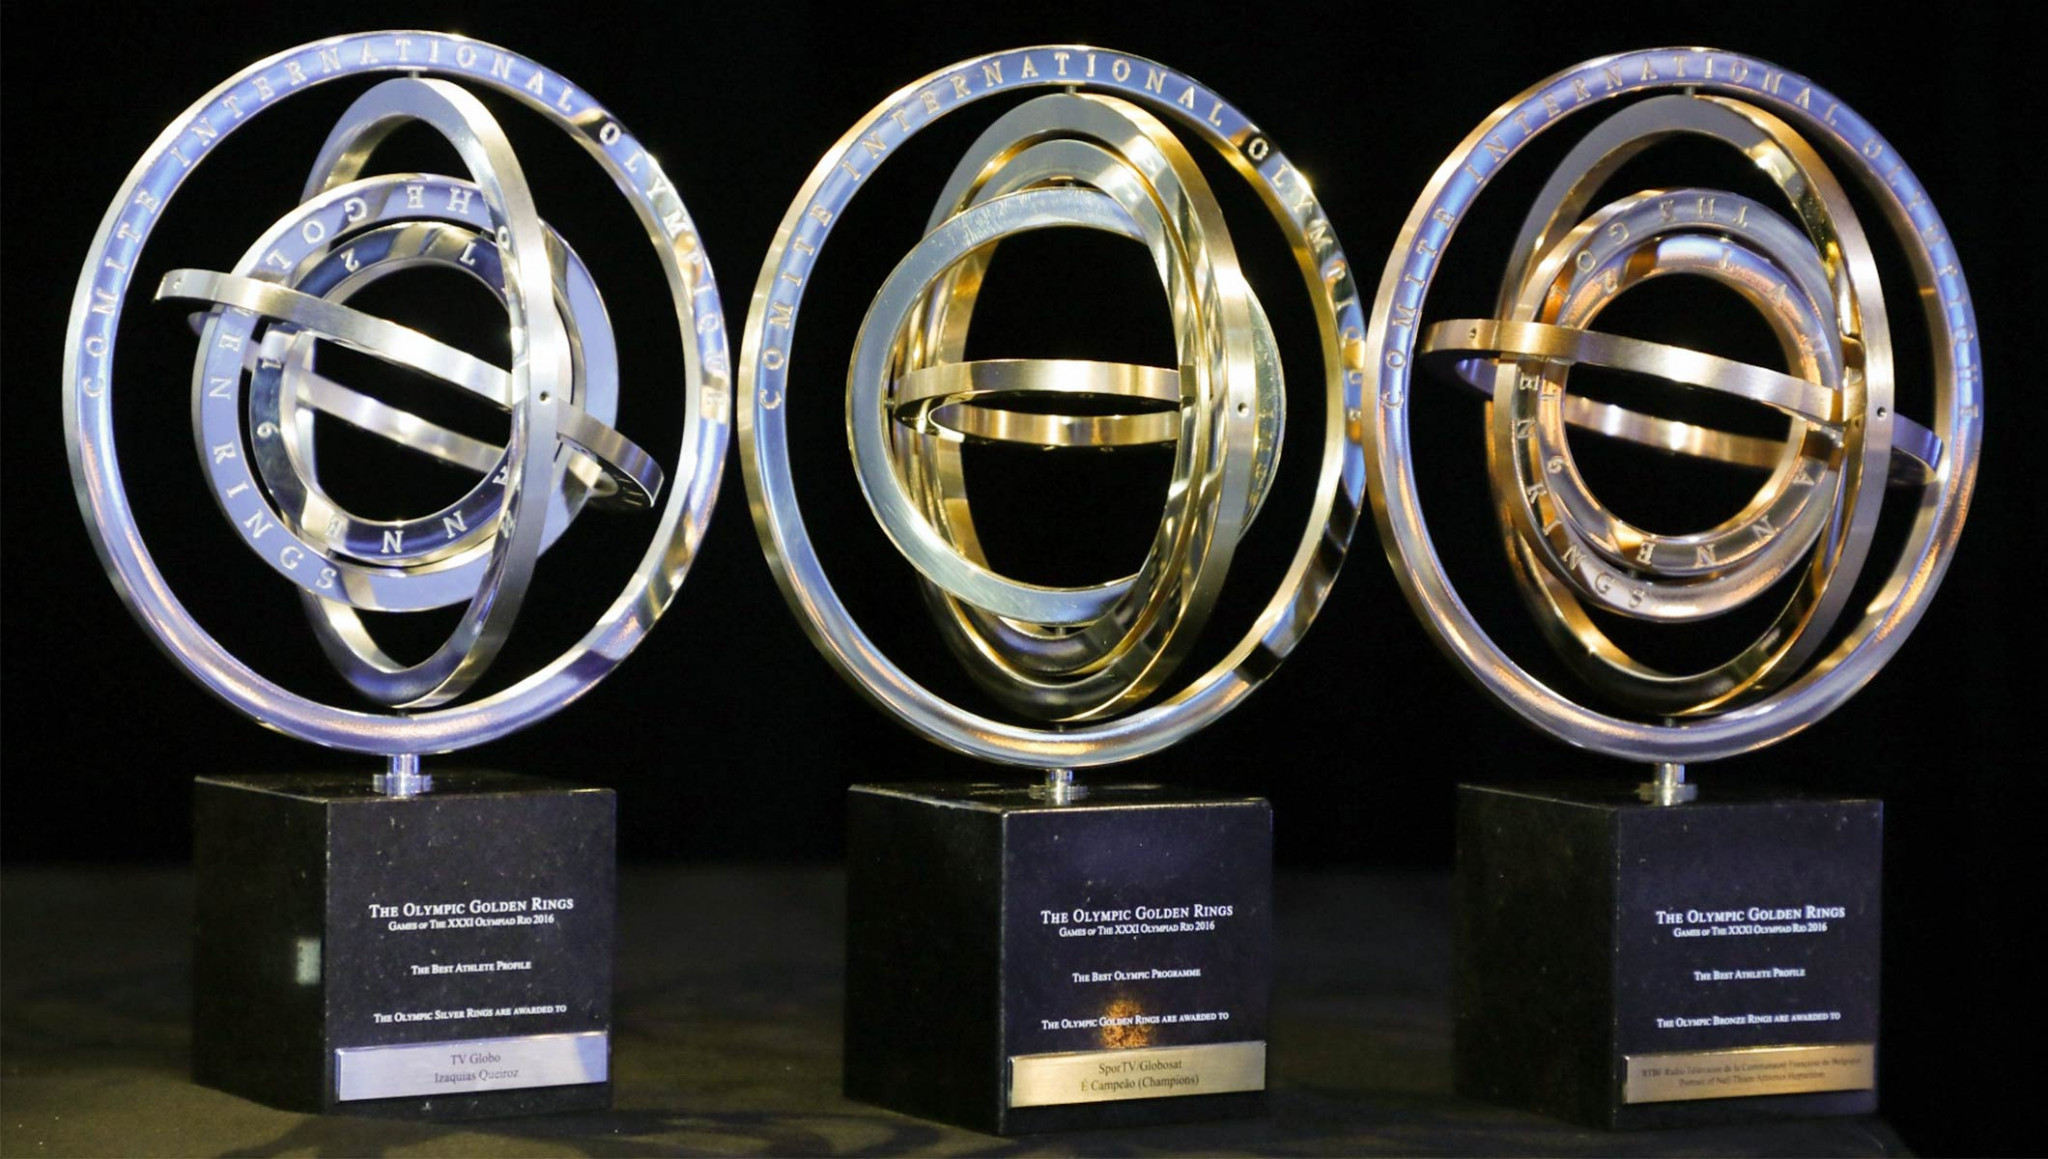 IOC Golden Rings awards have been handed out in Lausanne ©IOC